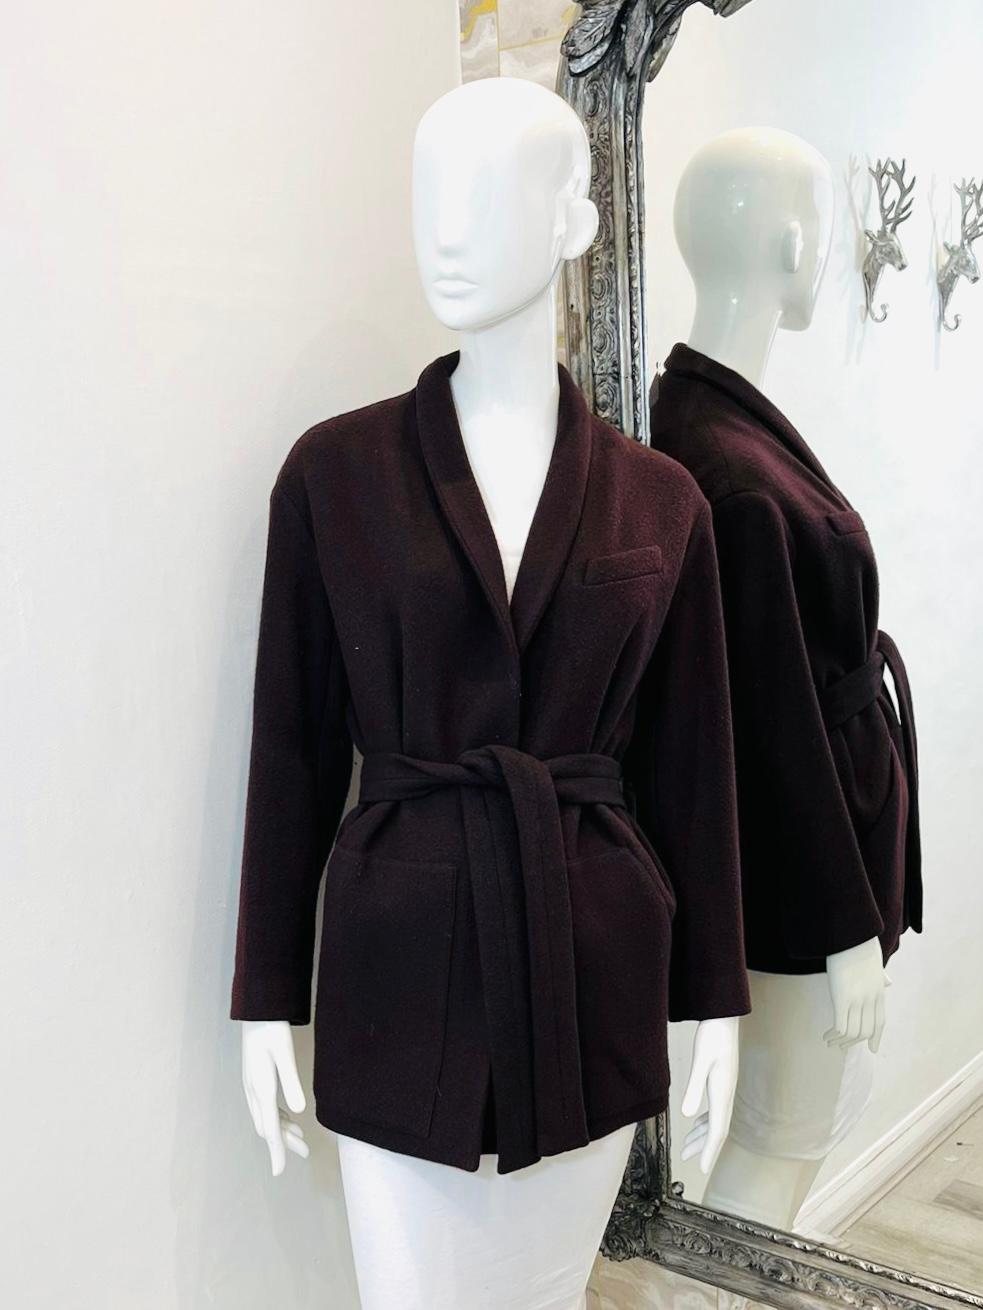 Iro Wool & Belted Coat

Burgundy coat with belted waist closure and oversized open pockets.

Size - 36FR

Condition - Very Good

Composition - 60% Wool, 25% Silk, 15% Polyamide, Lining Cotton Mix